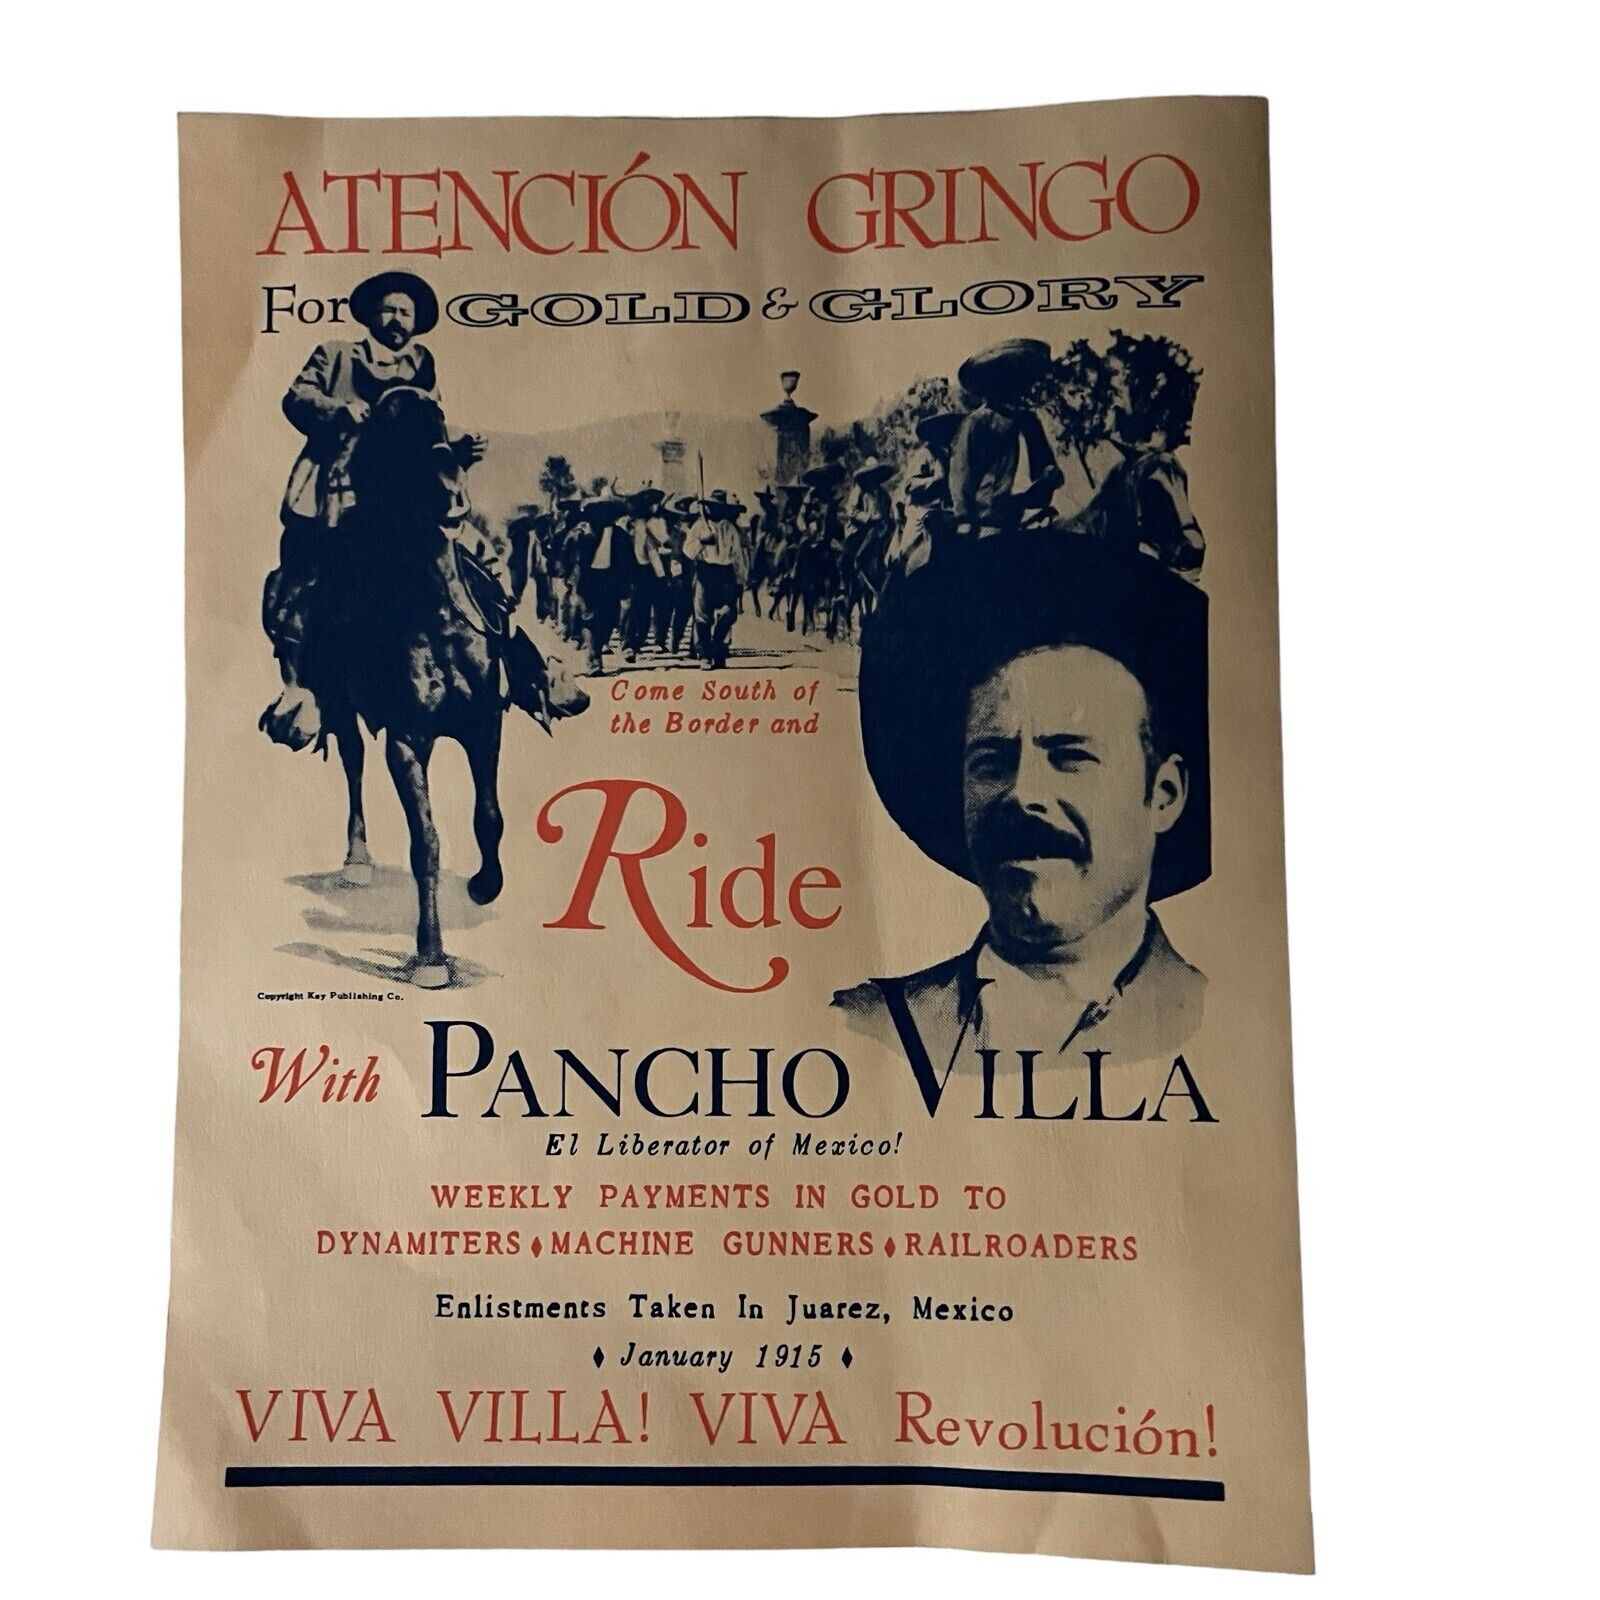 Vintage Atencion Gringo - Ride With Pancho Villa for Gold & Glory POSTER 11x14